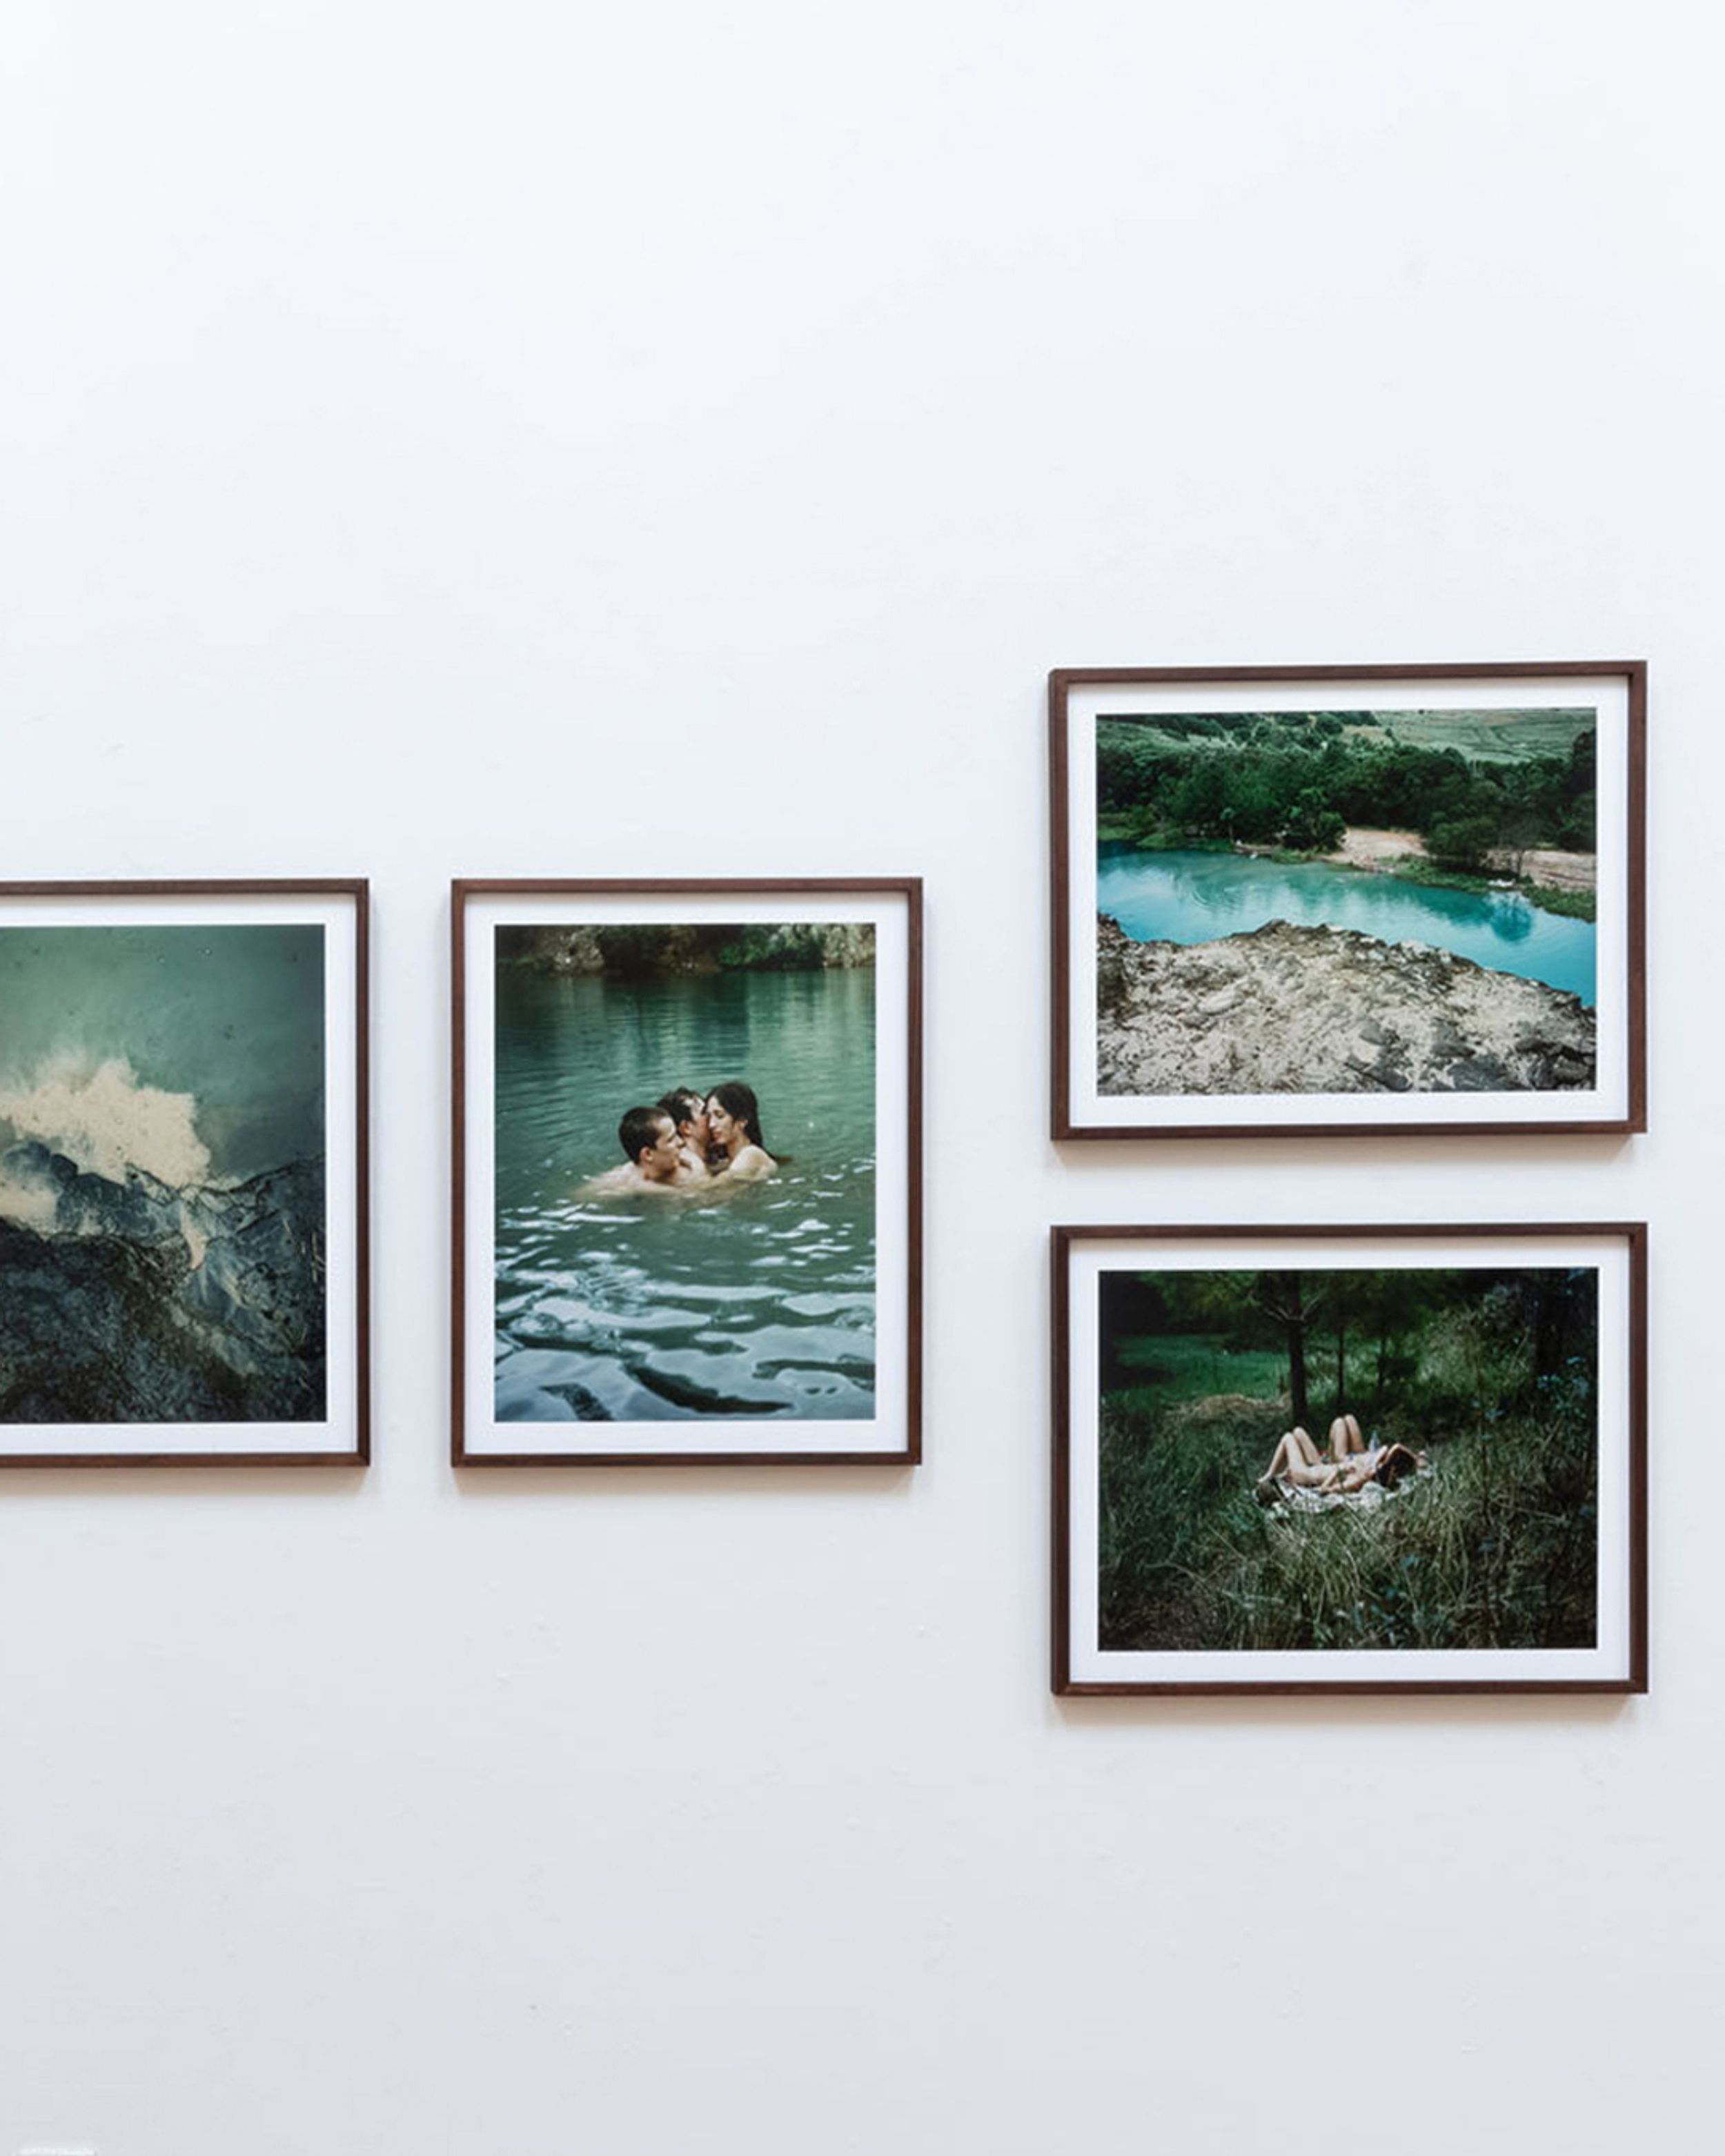 Gallery wall of photographs featuring people swimming in a lake and in nature